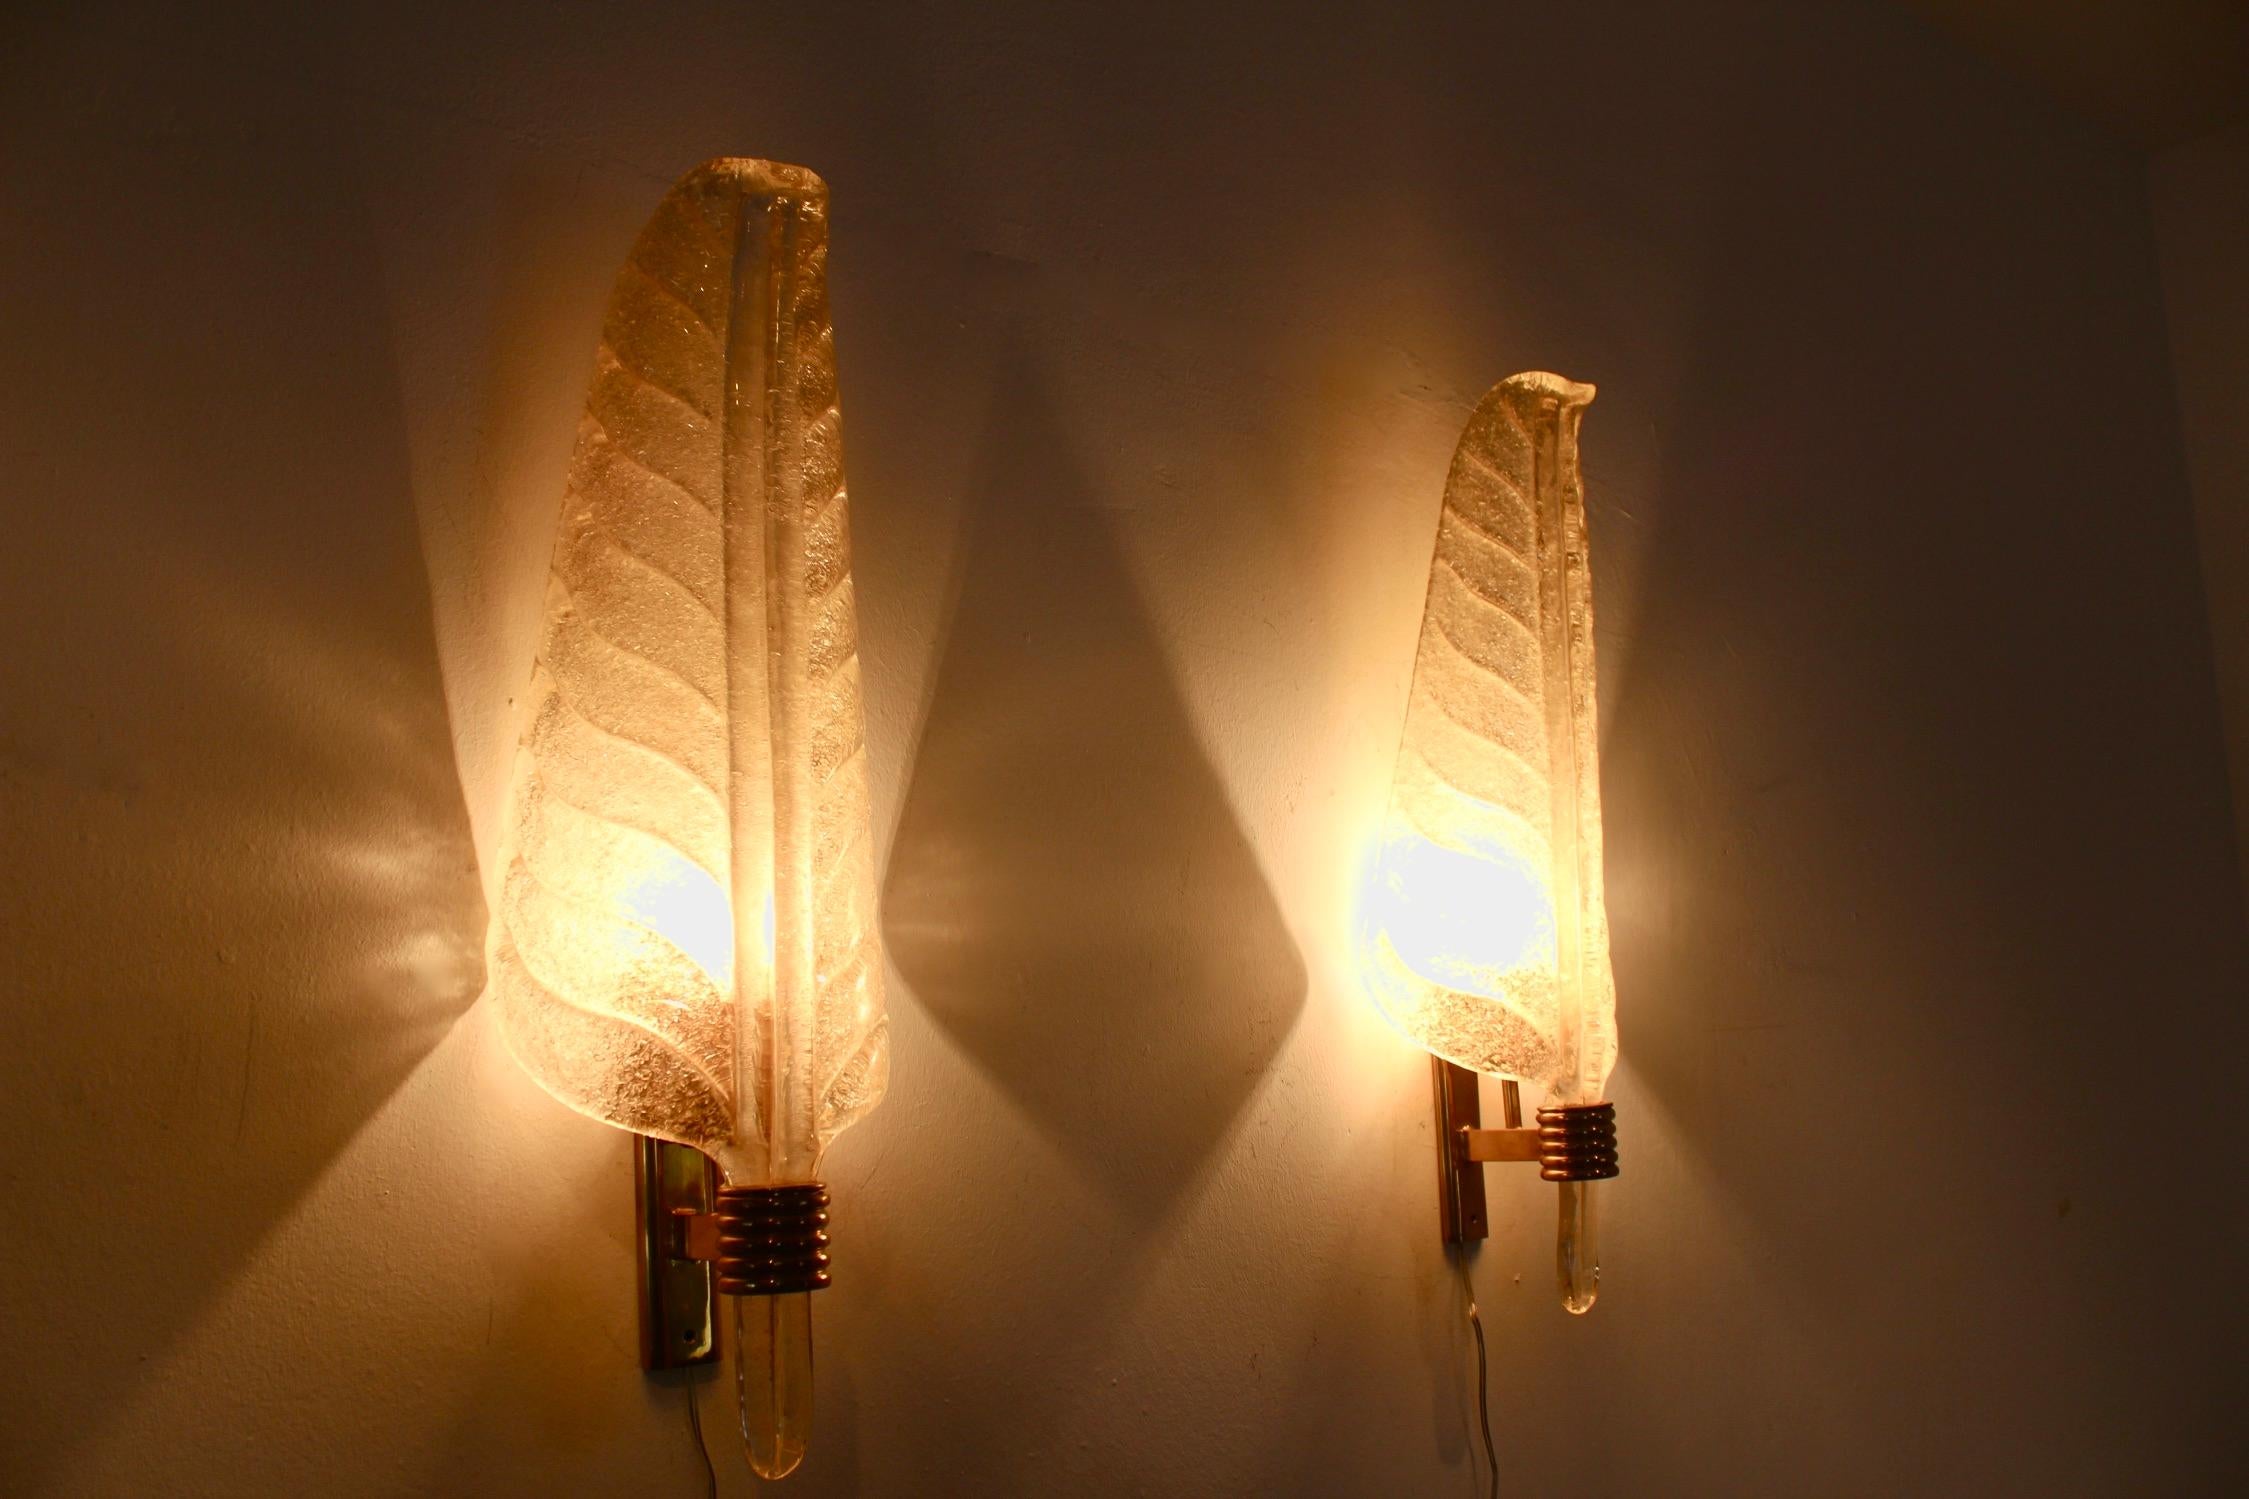 20th Century Glamorous Pair of Xl Murano 24kt Gold Flaked Glass Leaf Sconces, Barovier & Toso